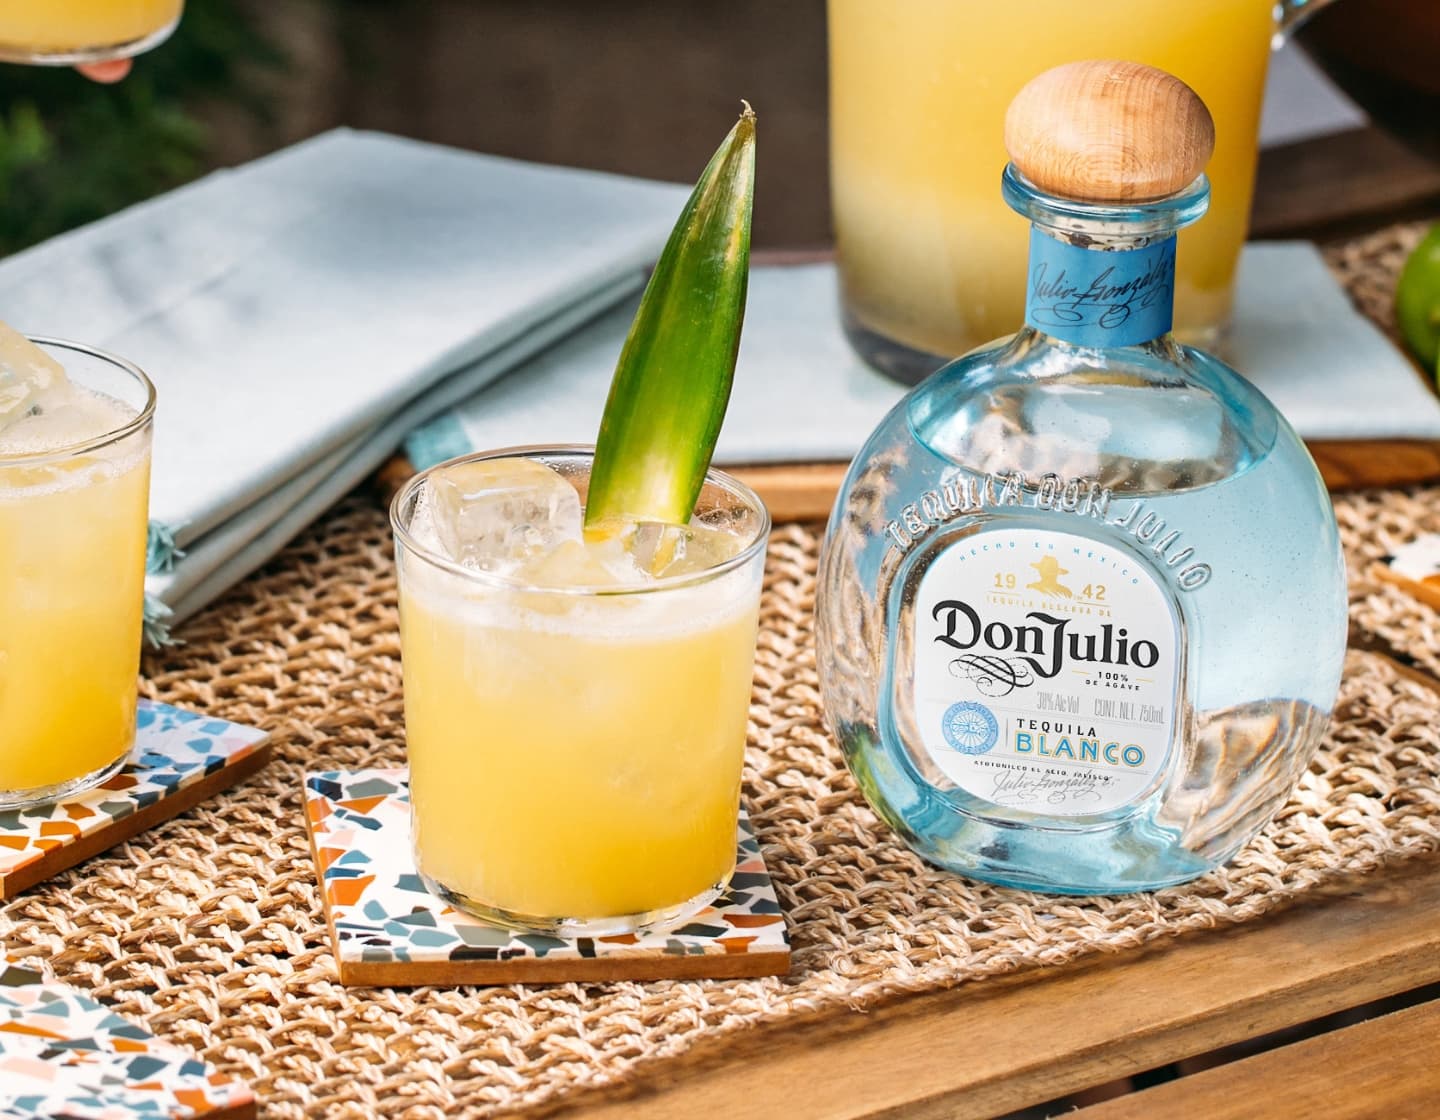 Bottle of Don Julio Tequila next to cocktails on a table